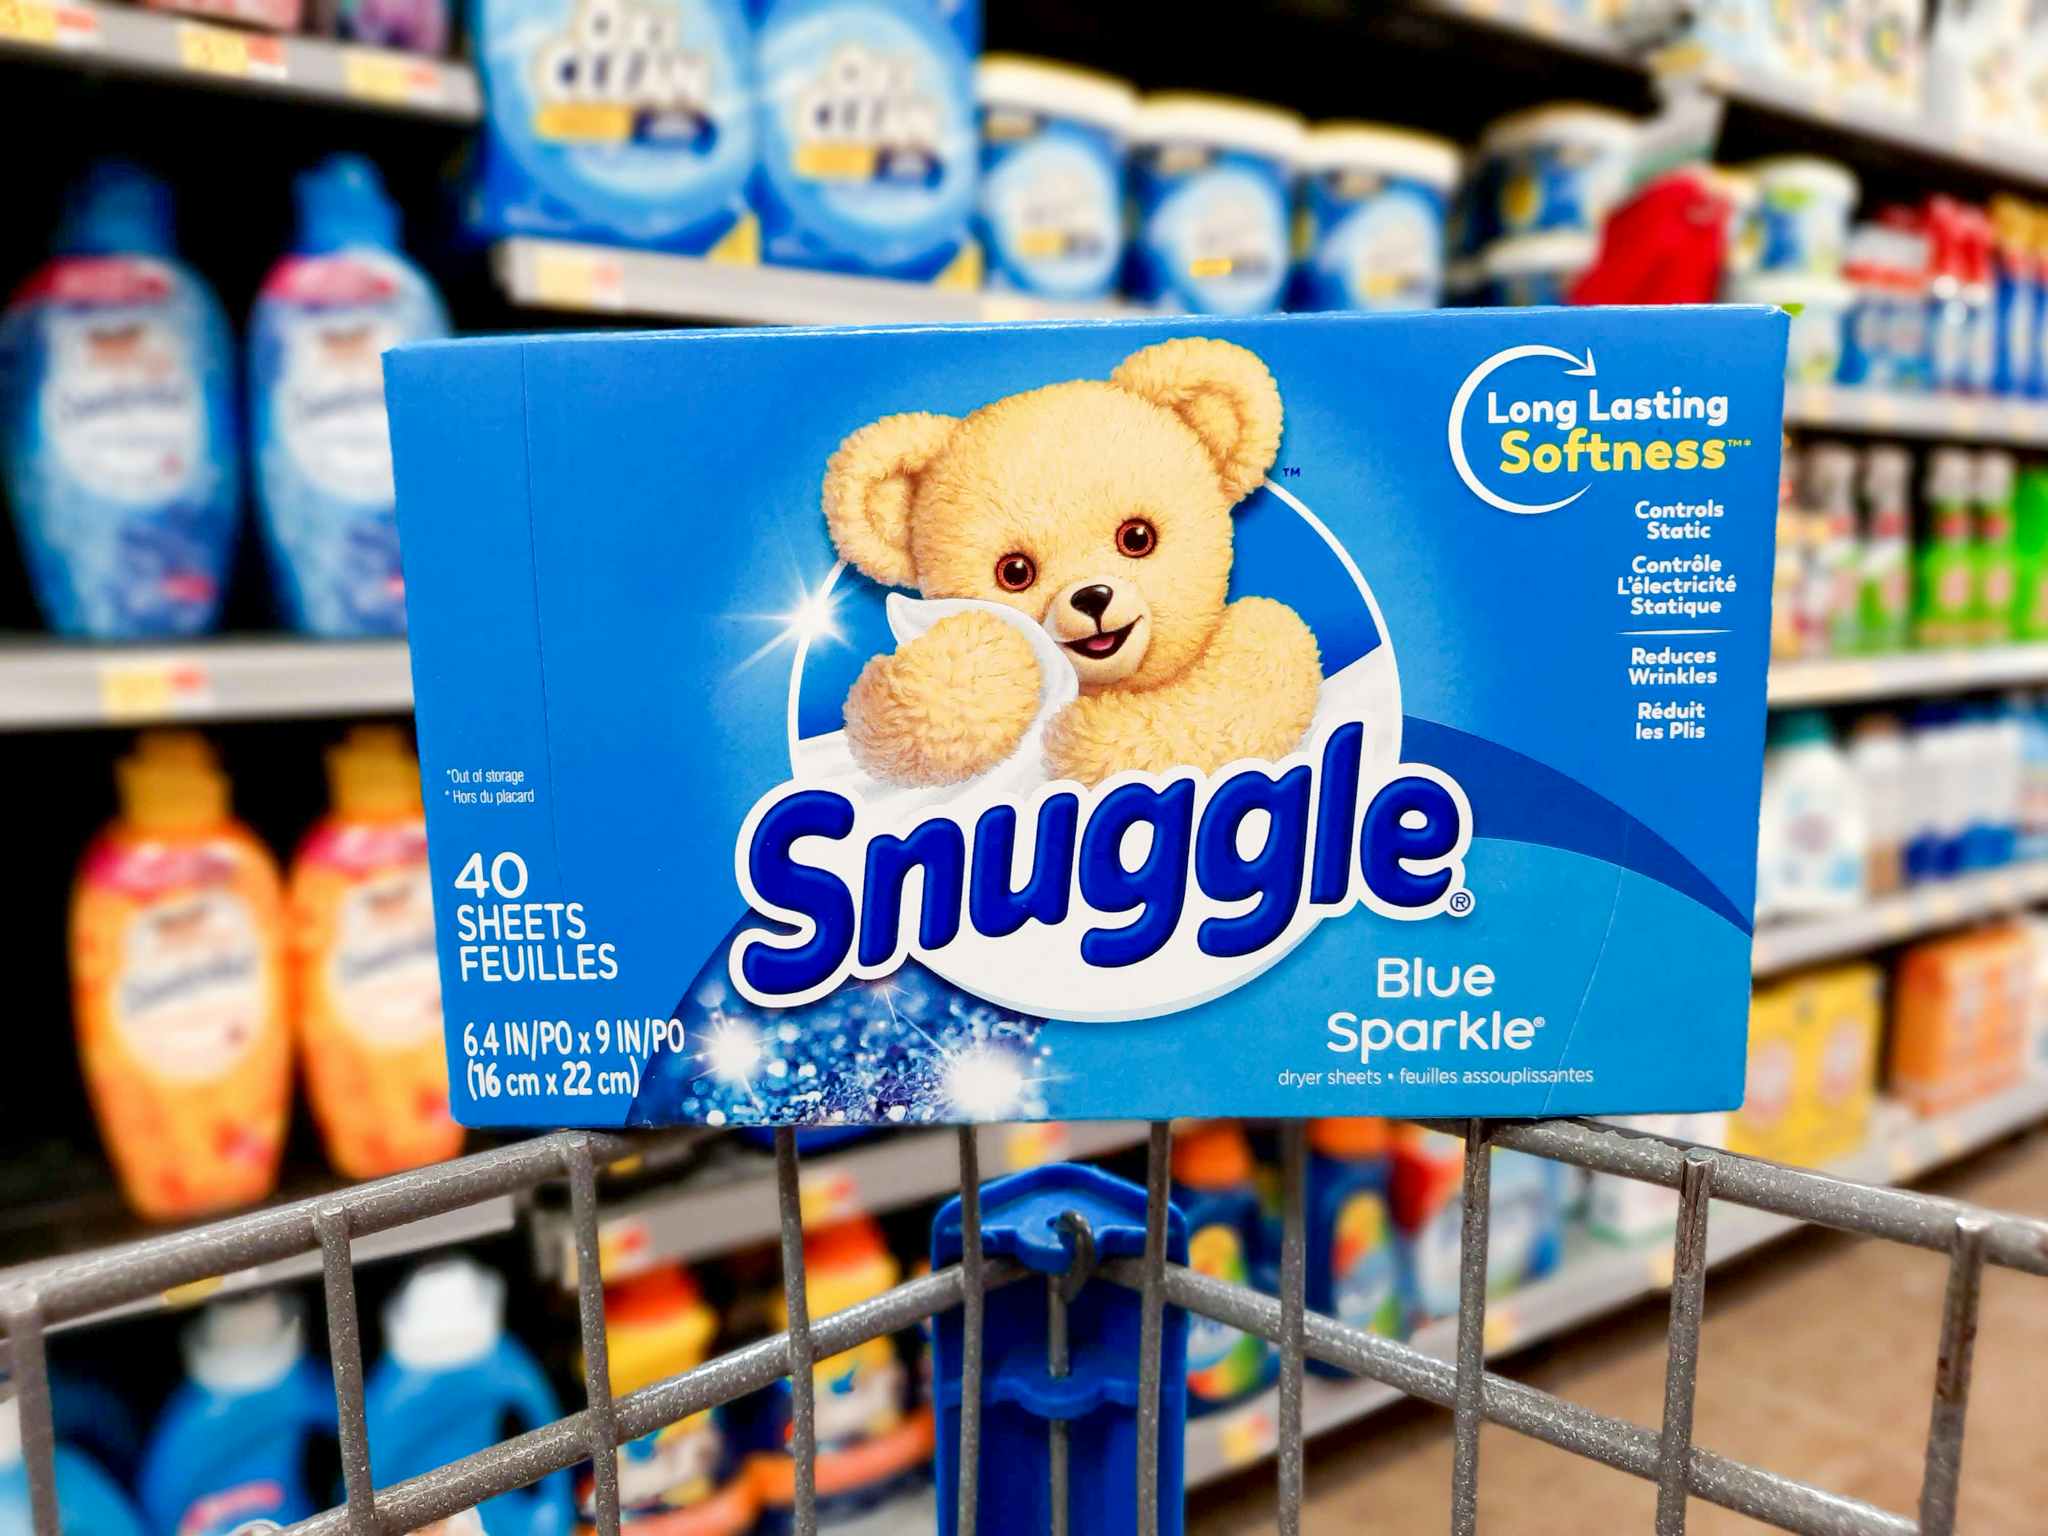 Snuggle Blue Sparkle Dryer Sheets balancing on the edge of a Walmart shopping cart